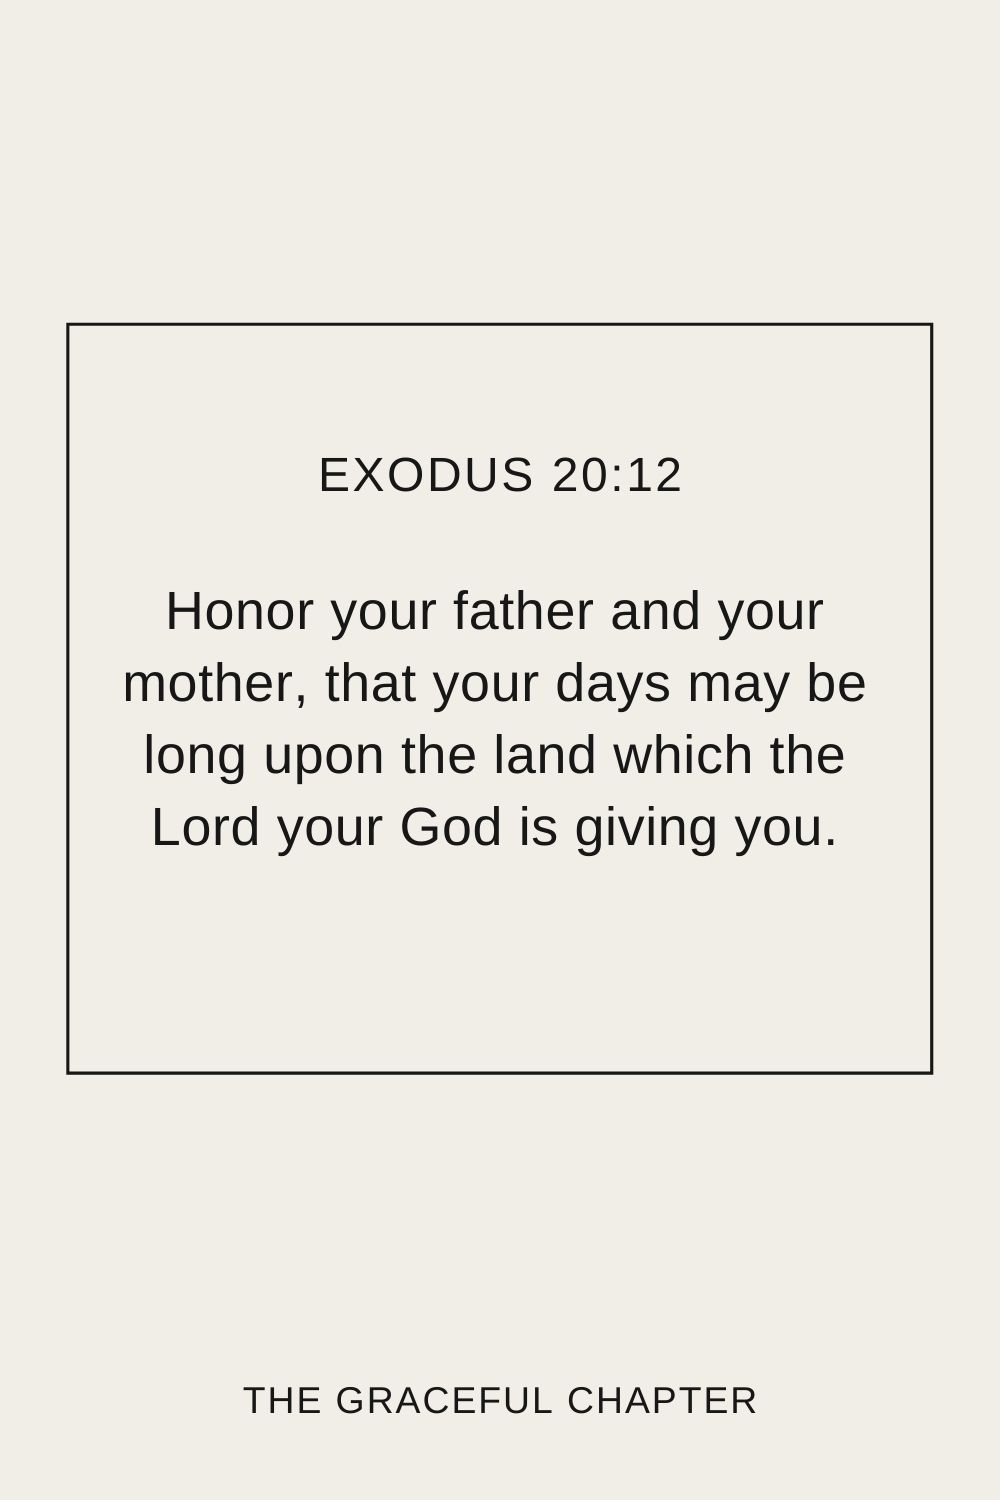 Honor your father and your mother, that your days may be long upon the land which the Lord your God is giving you. Exodus 20:12